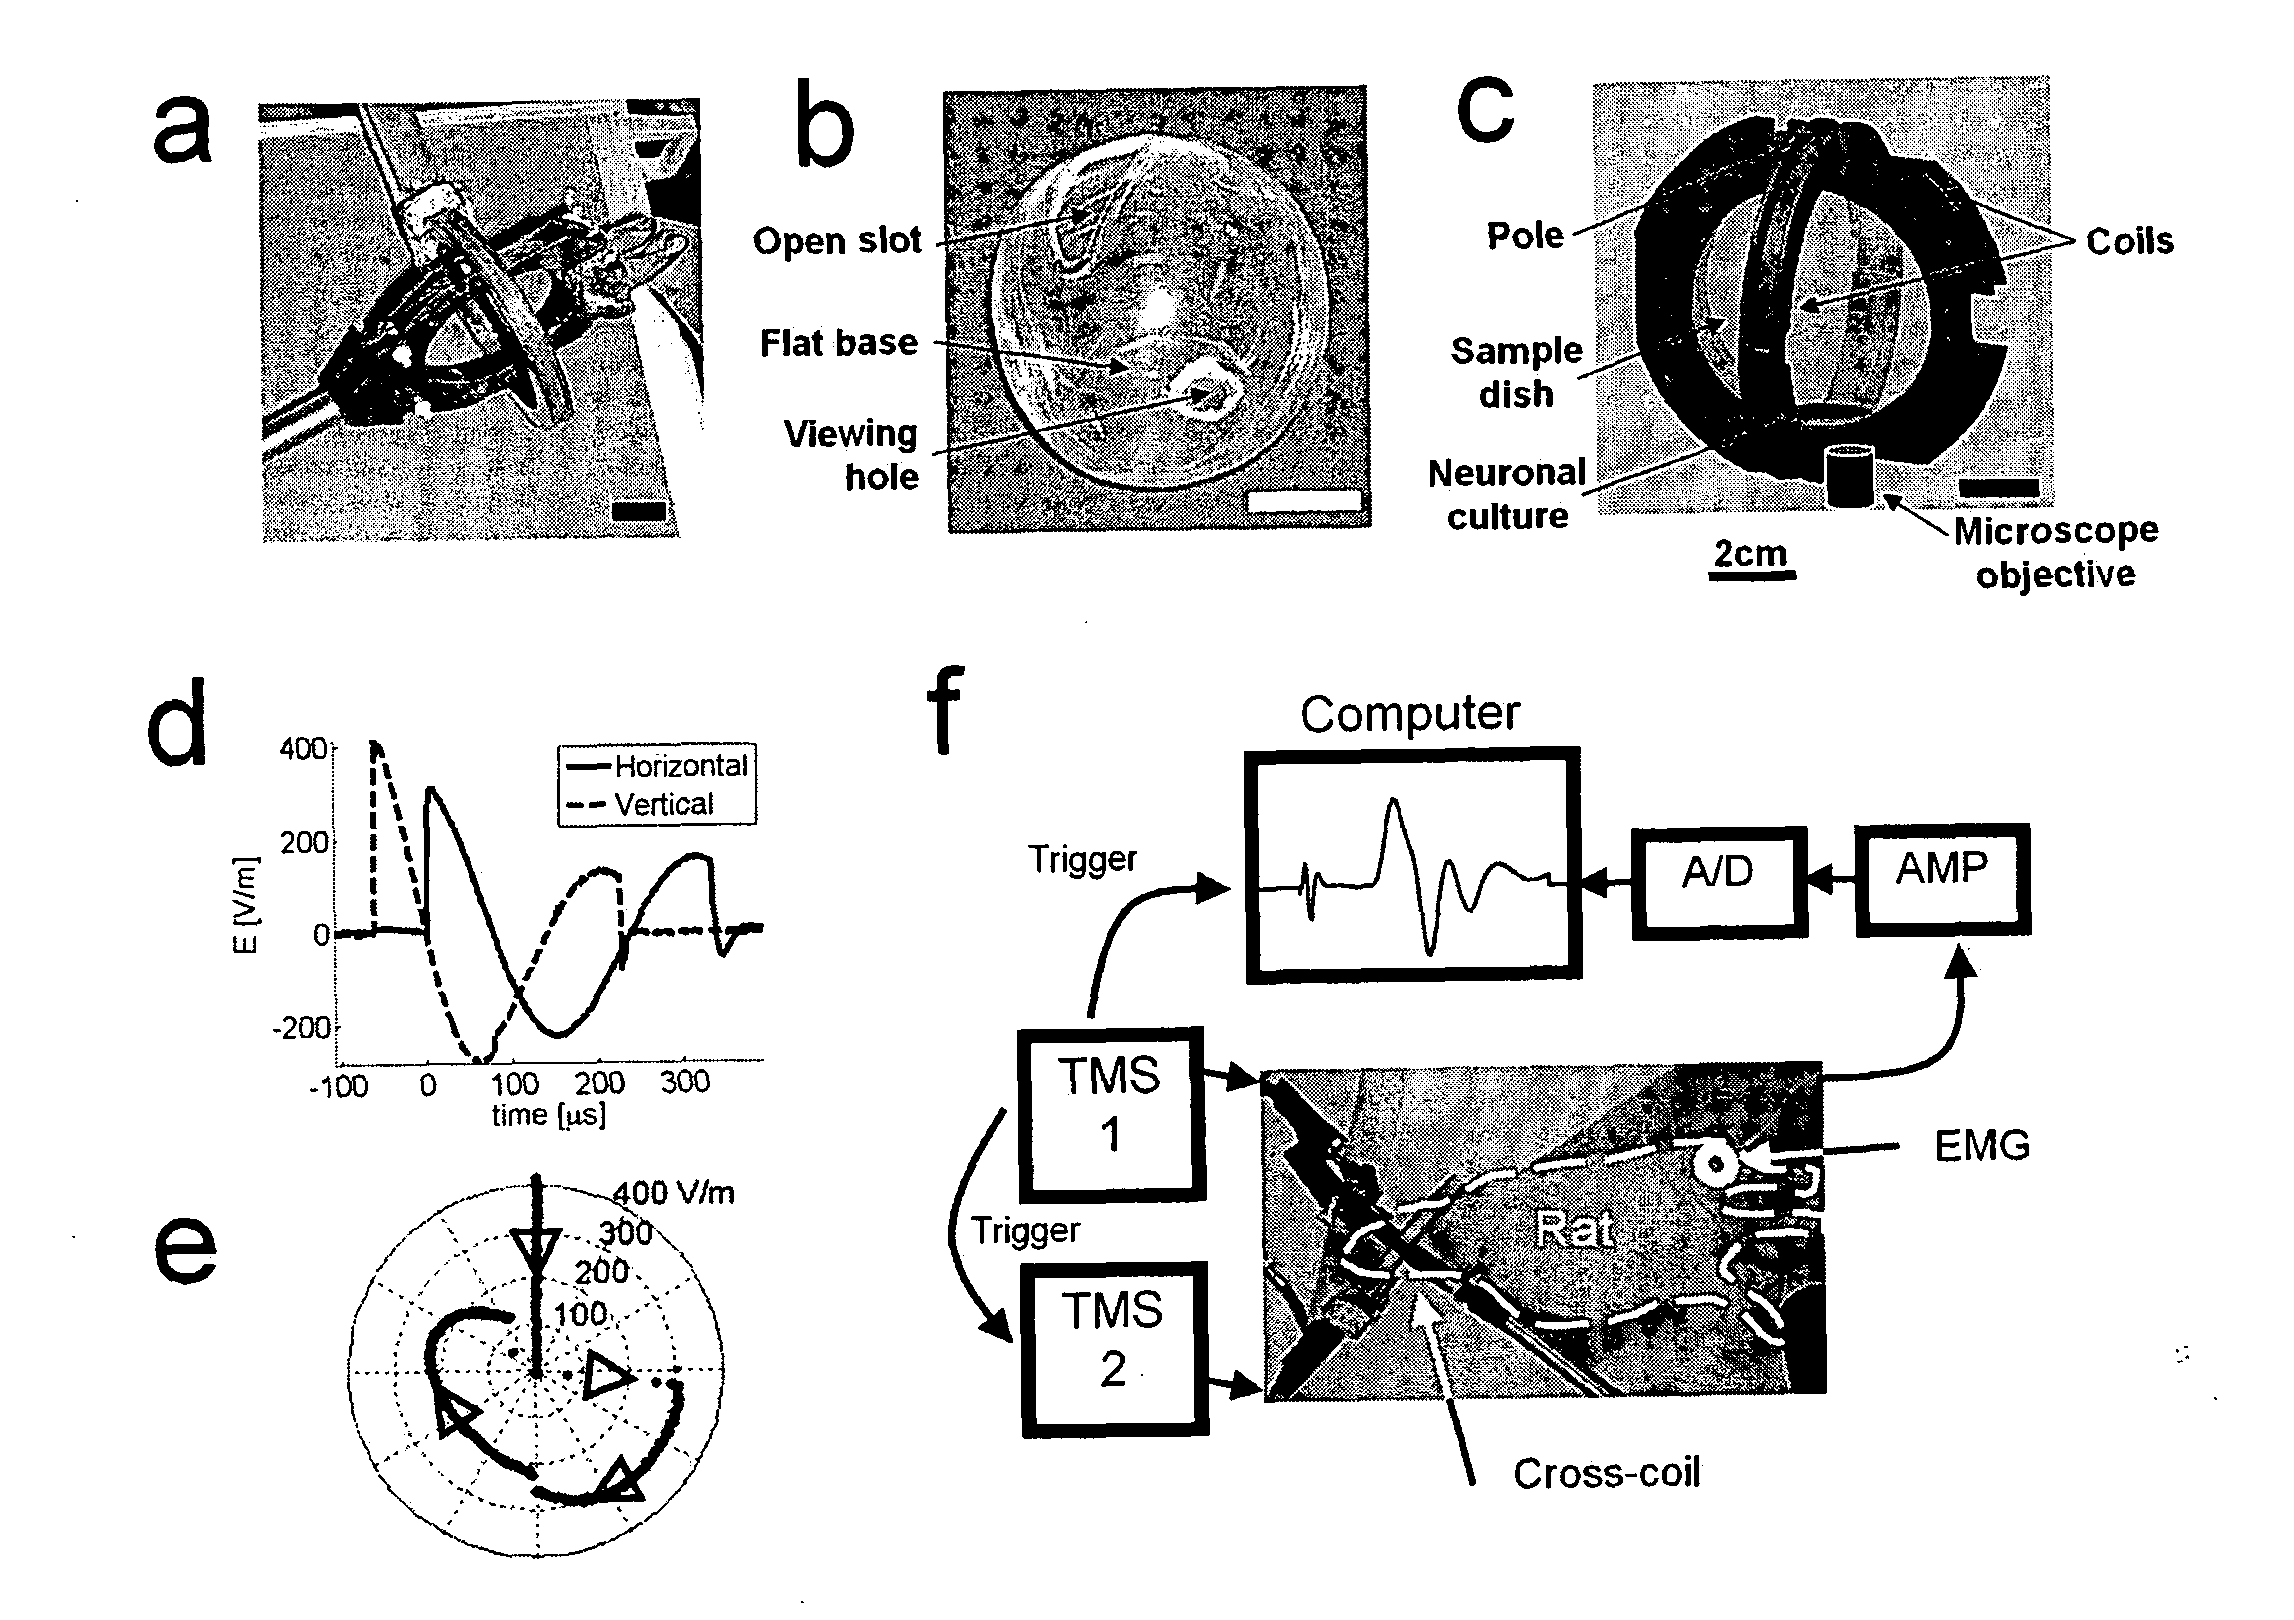 Magnetic configuration and timing scheme for transcranial magnetic stimulation